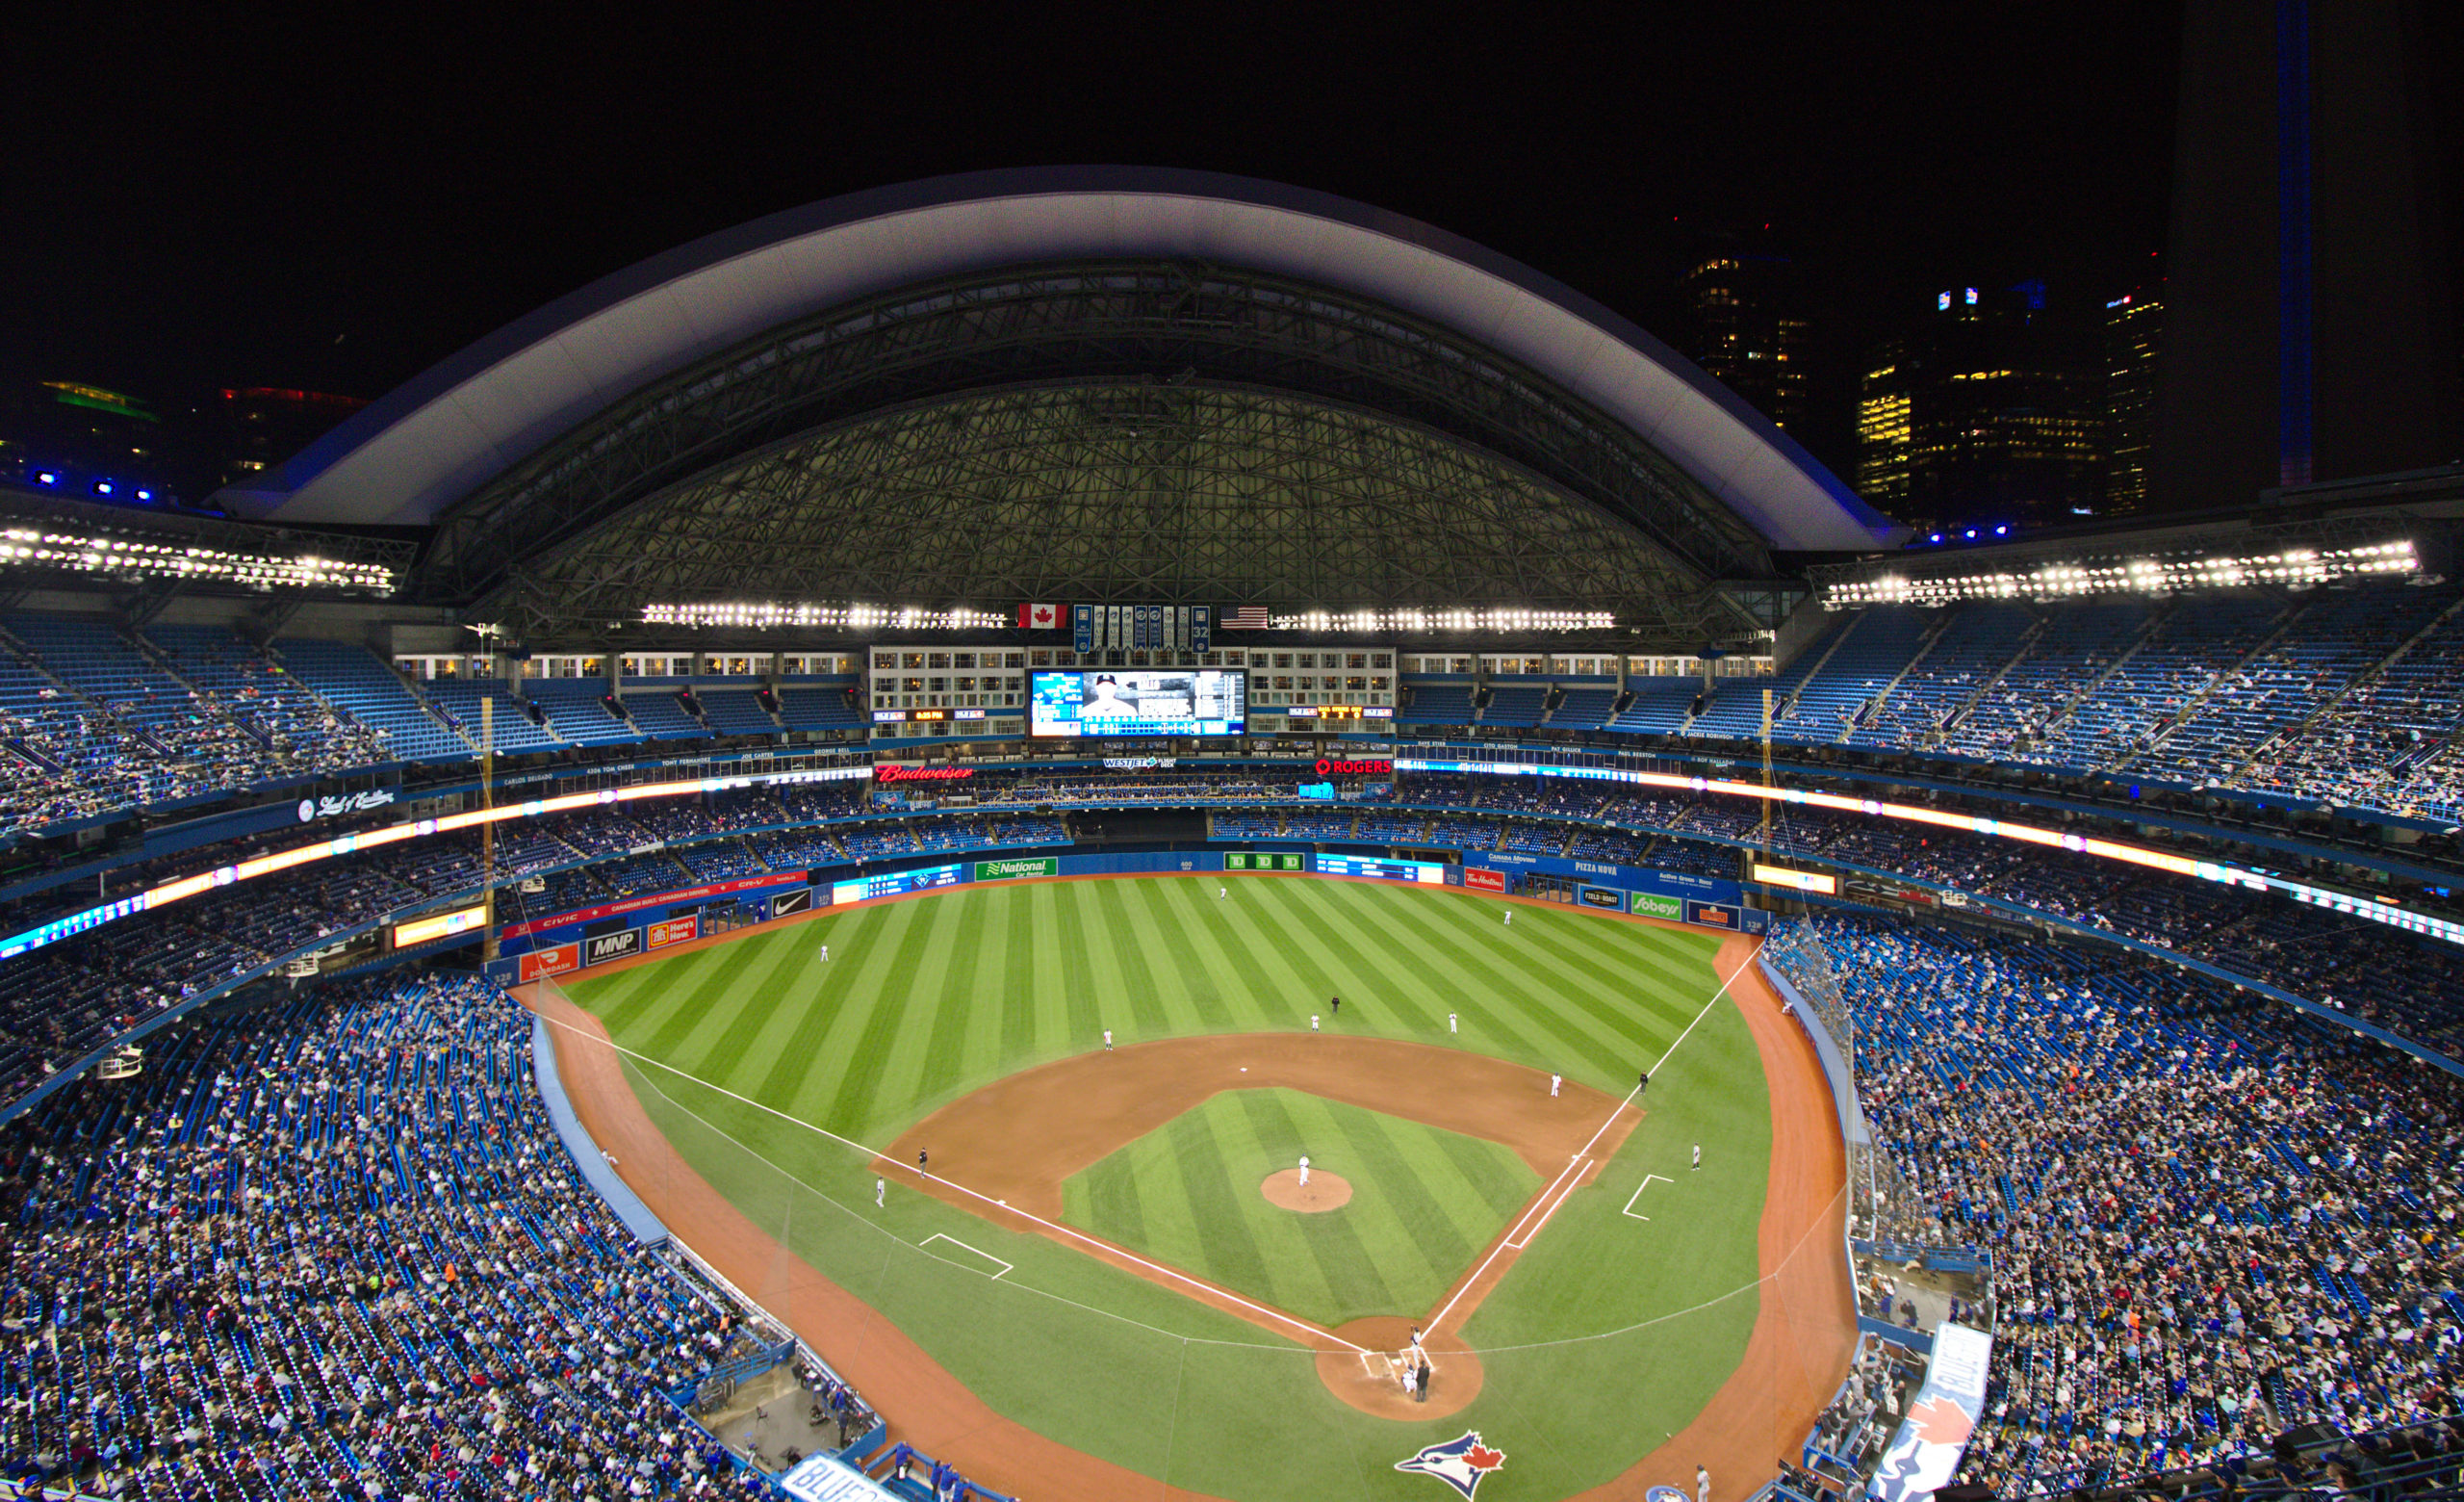 Sports Have Finally Returned to Toronto, and That’s Great News for Fans and Players